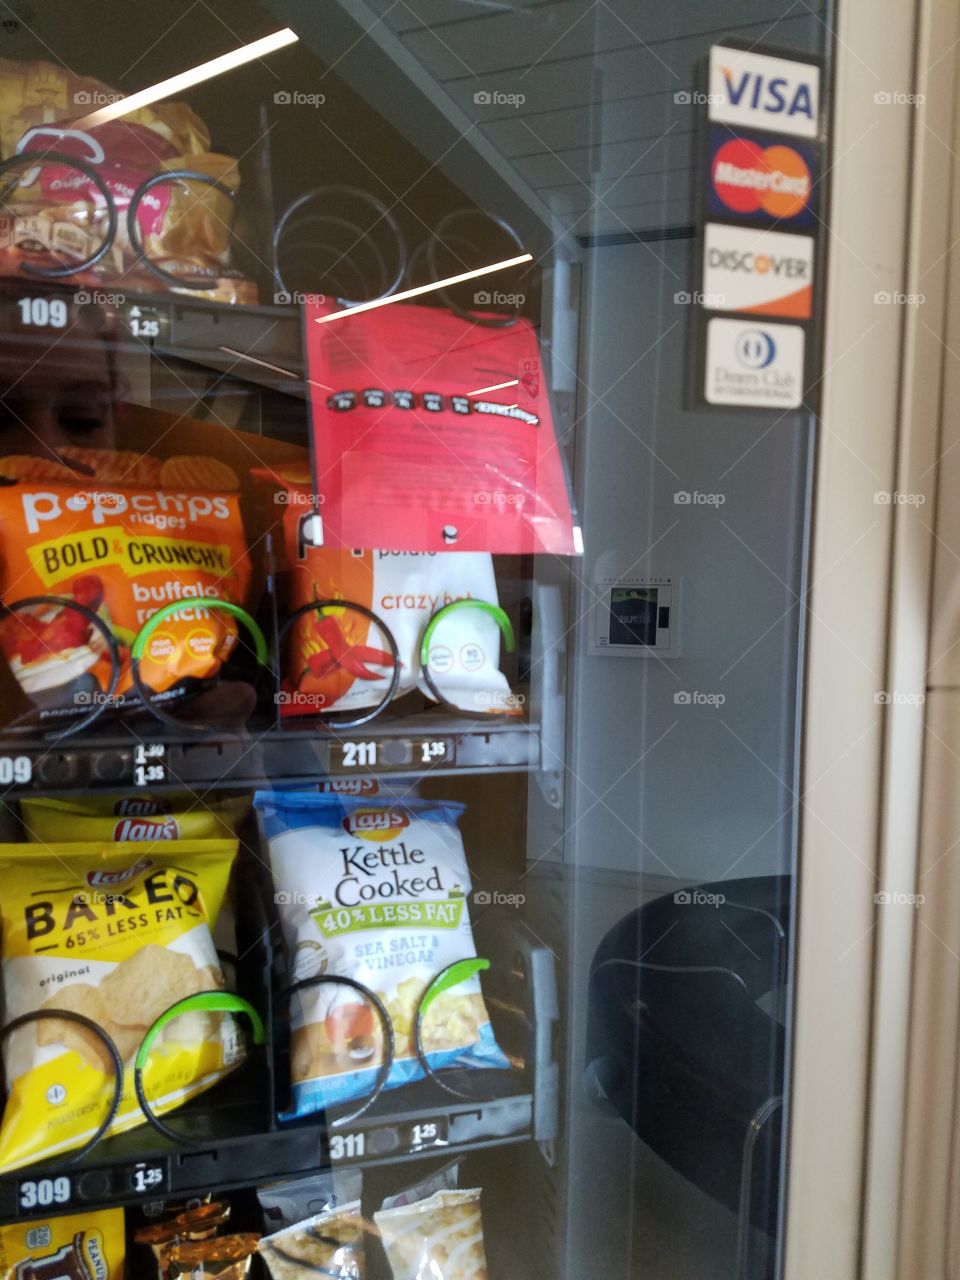 That frustrating moment when you've put your last dollar into the vending machine and the snack doesn't fall.